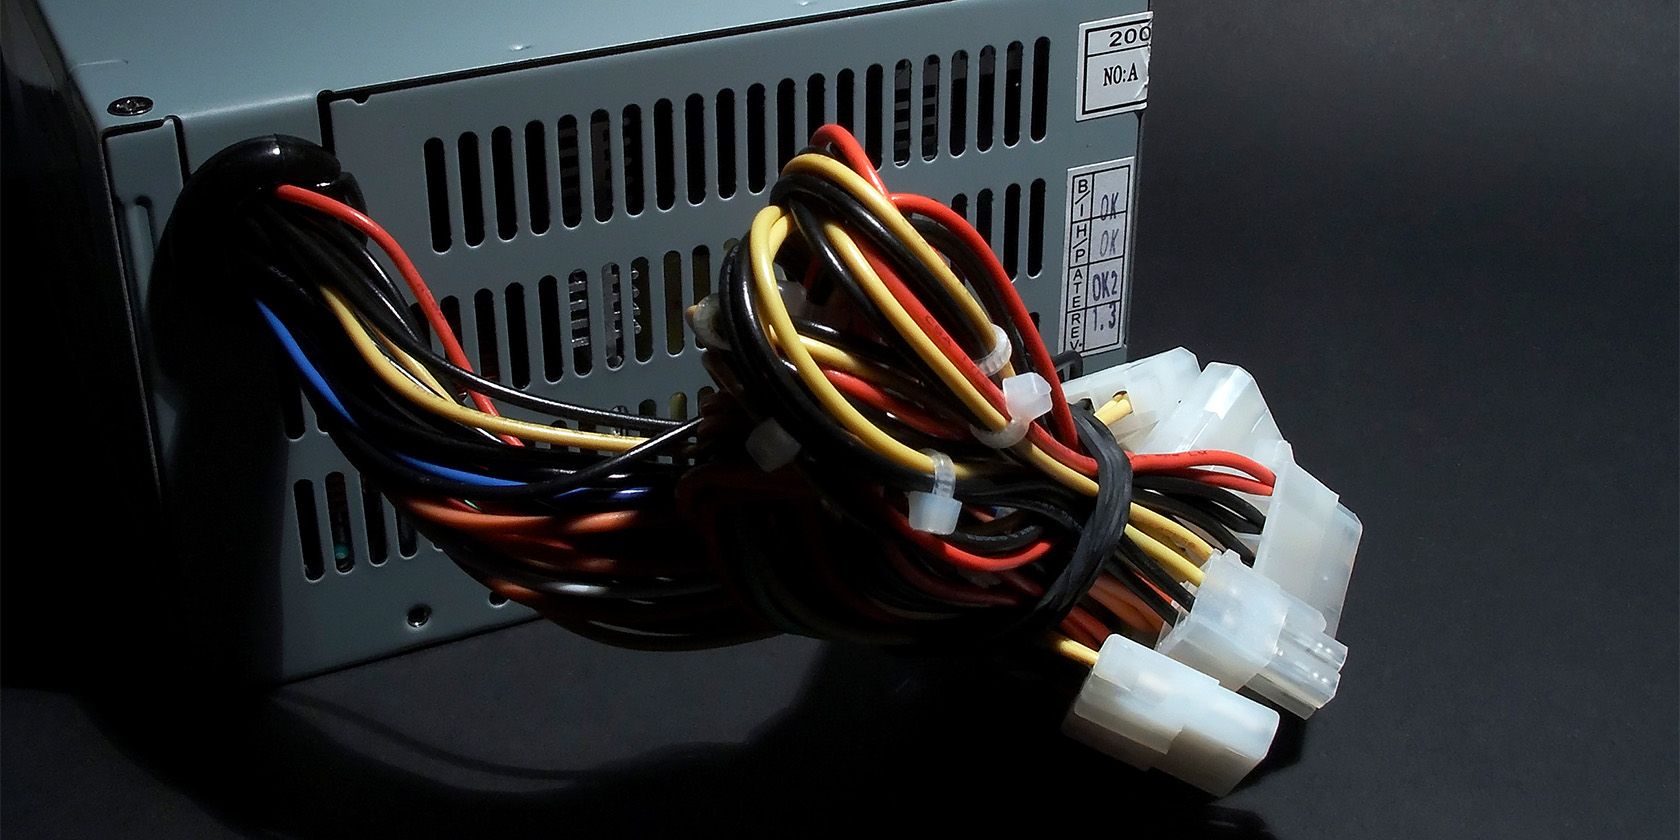 What is a PSU? Why is it important to have a good one?